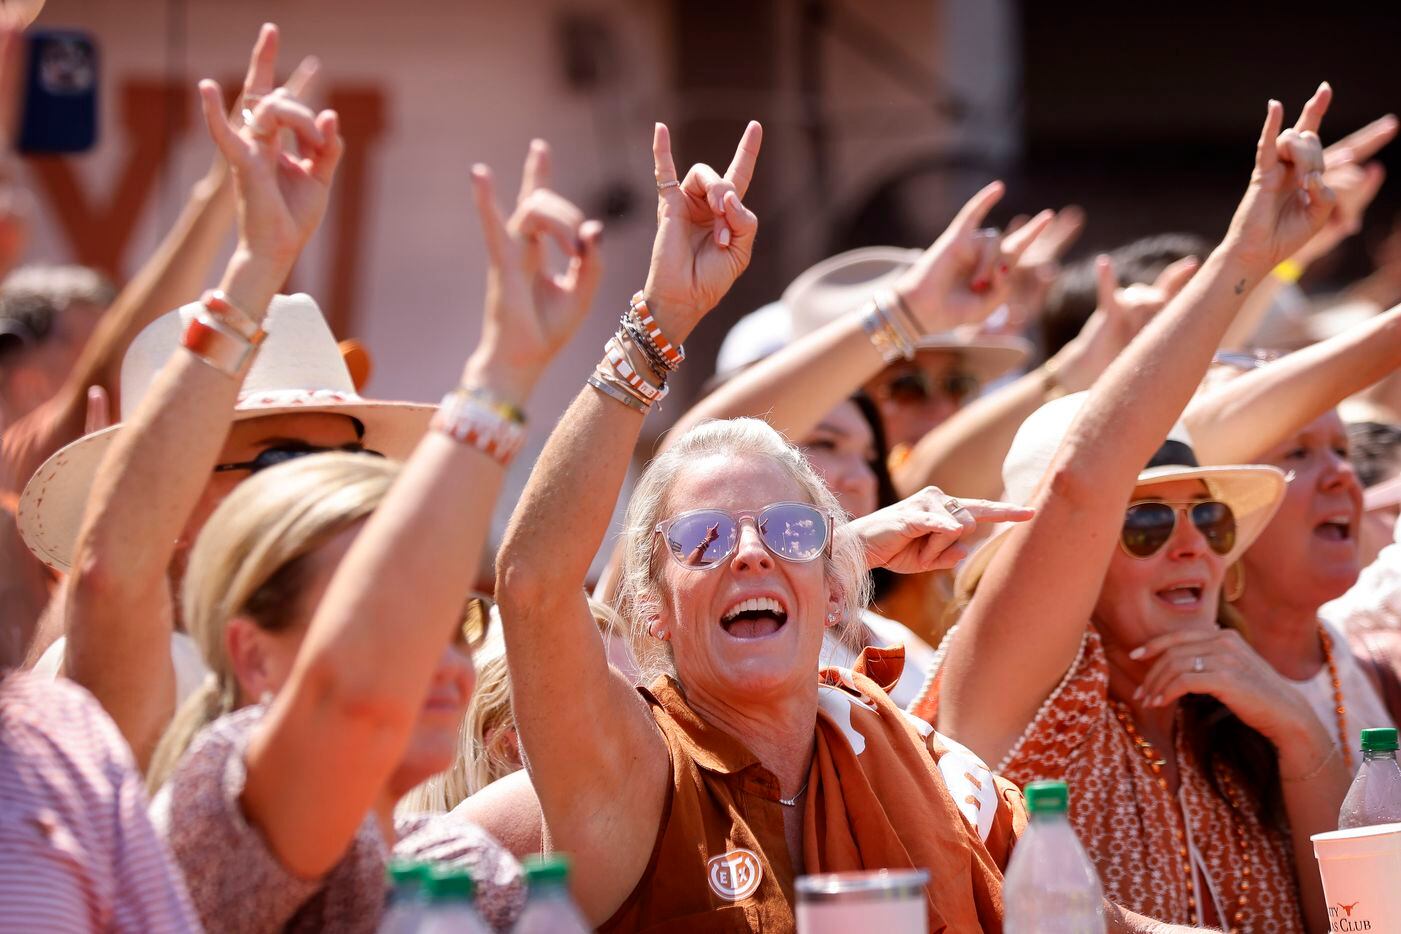 Texas Longhorns fans sing the school song following their loss to the Alabama Crimson Tide...